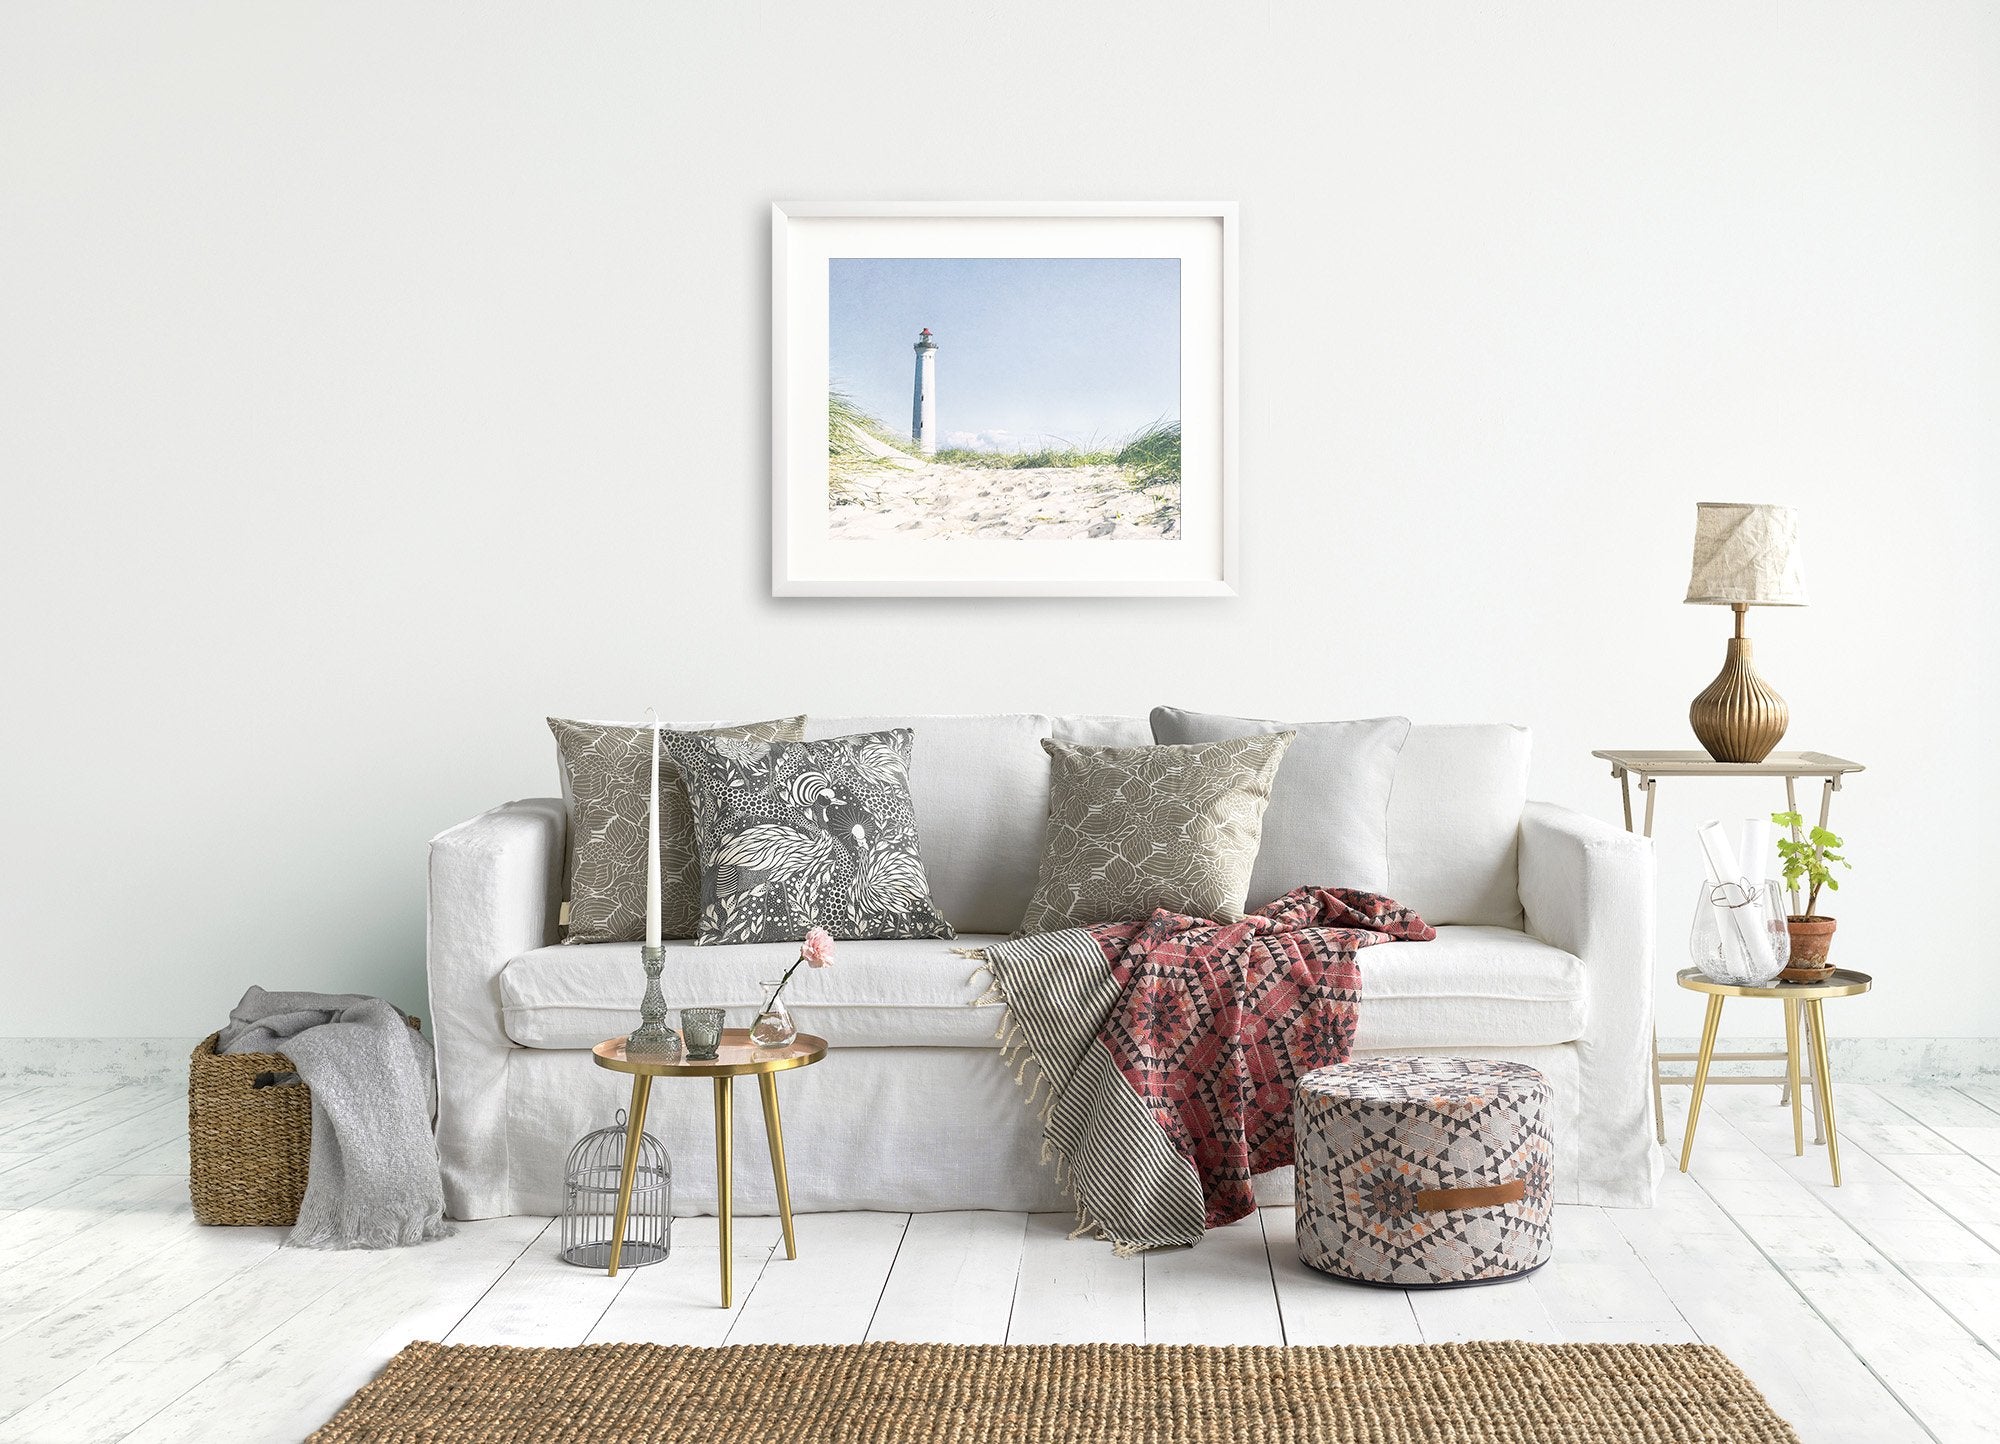 A serene living room featuring a white sofa adorned with various patterned cushions, a small round table, a wooden floor lamp, Offley Green's Nautical Print, 'The Lighthouse' on the wall, and decorative items including plants and a woven basket.